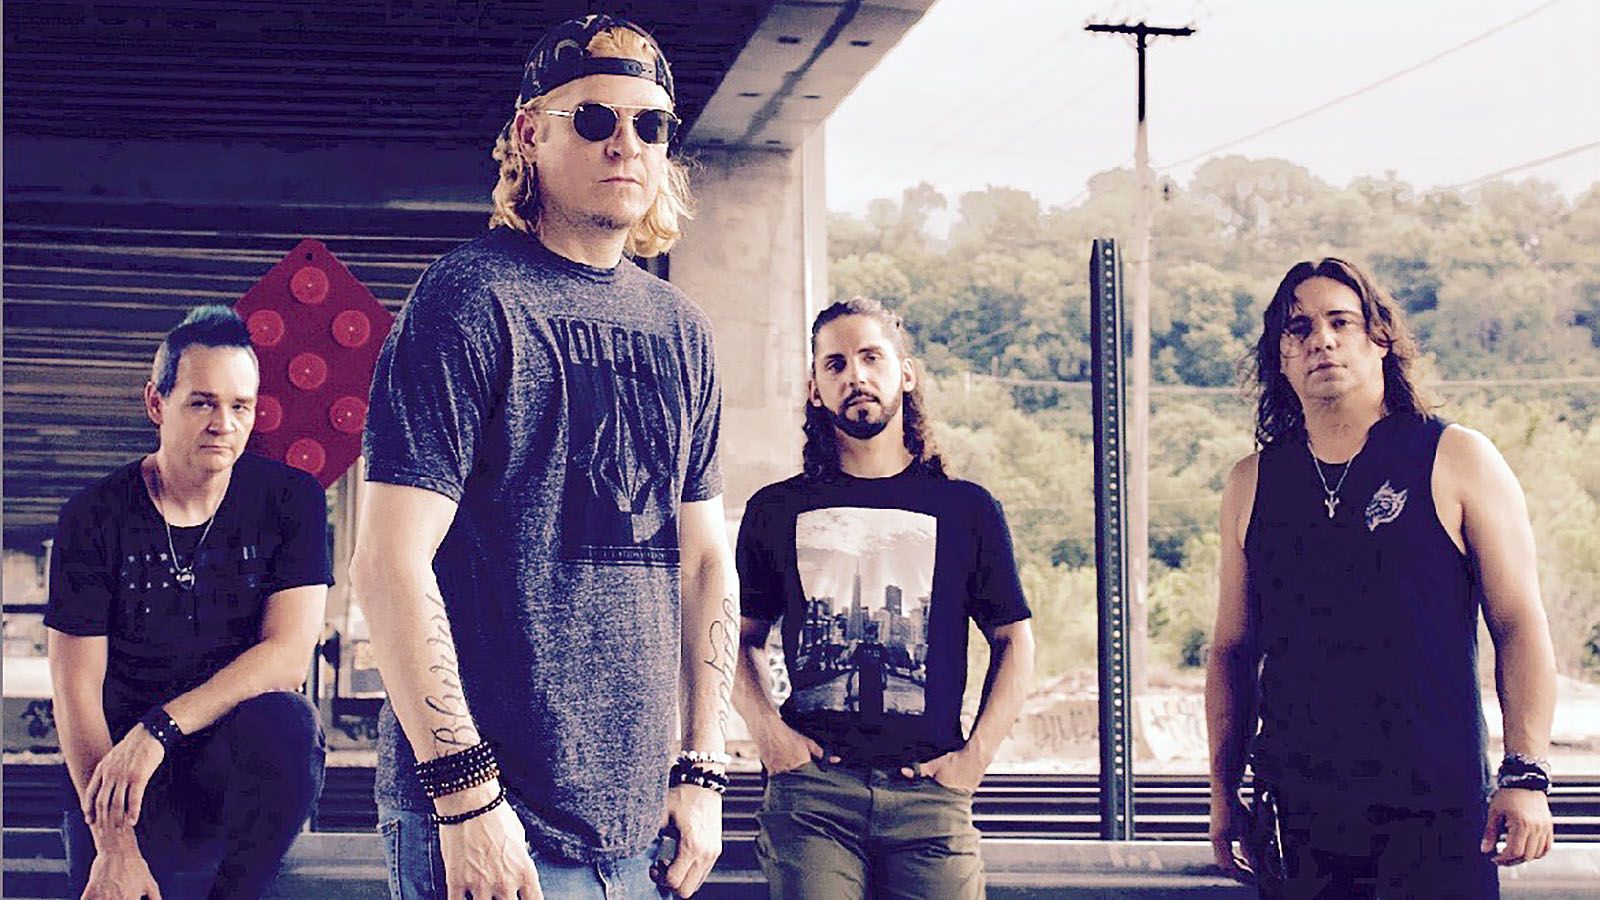 Puddle of Mudd will be at The Eclectic Room in Angola on Nov. 19.